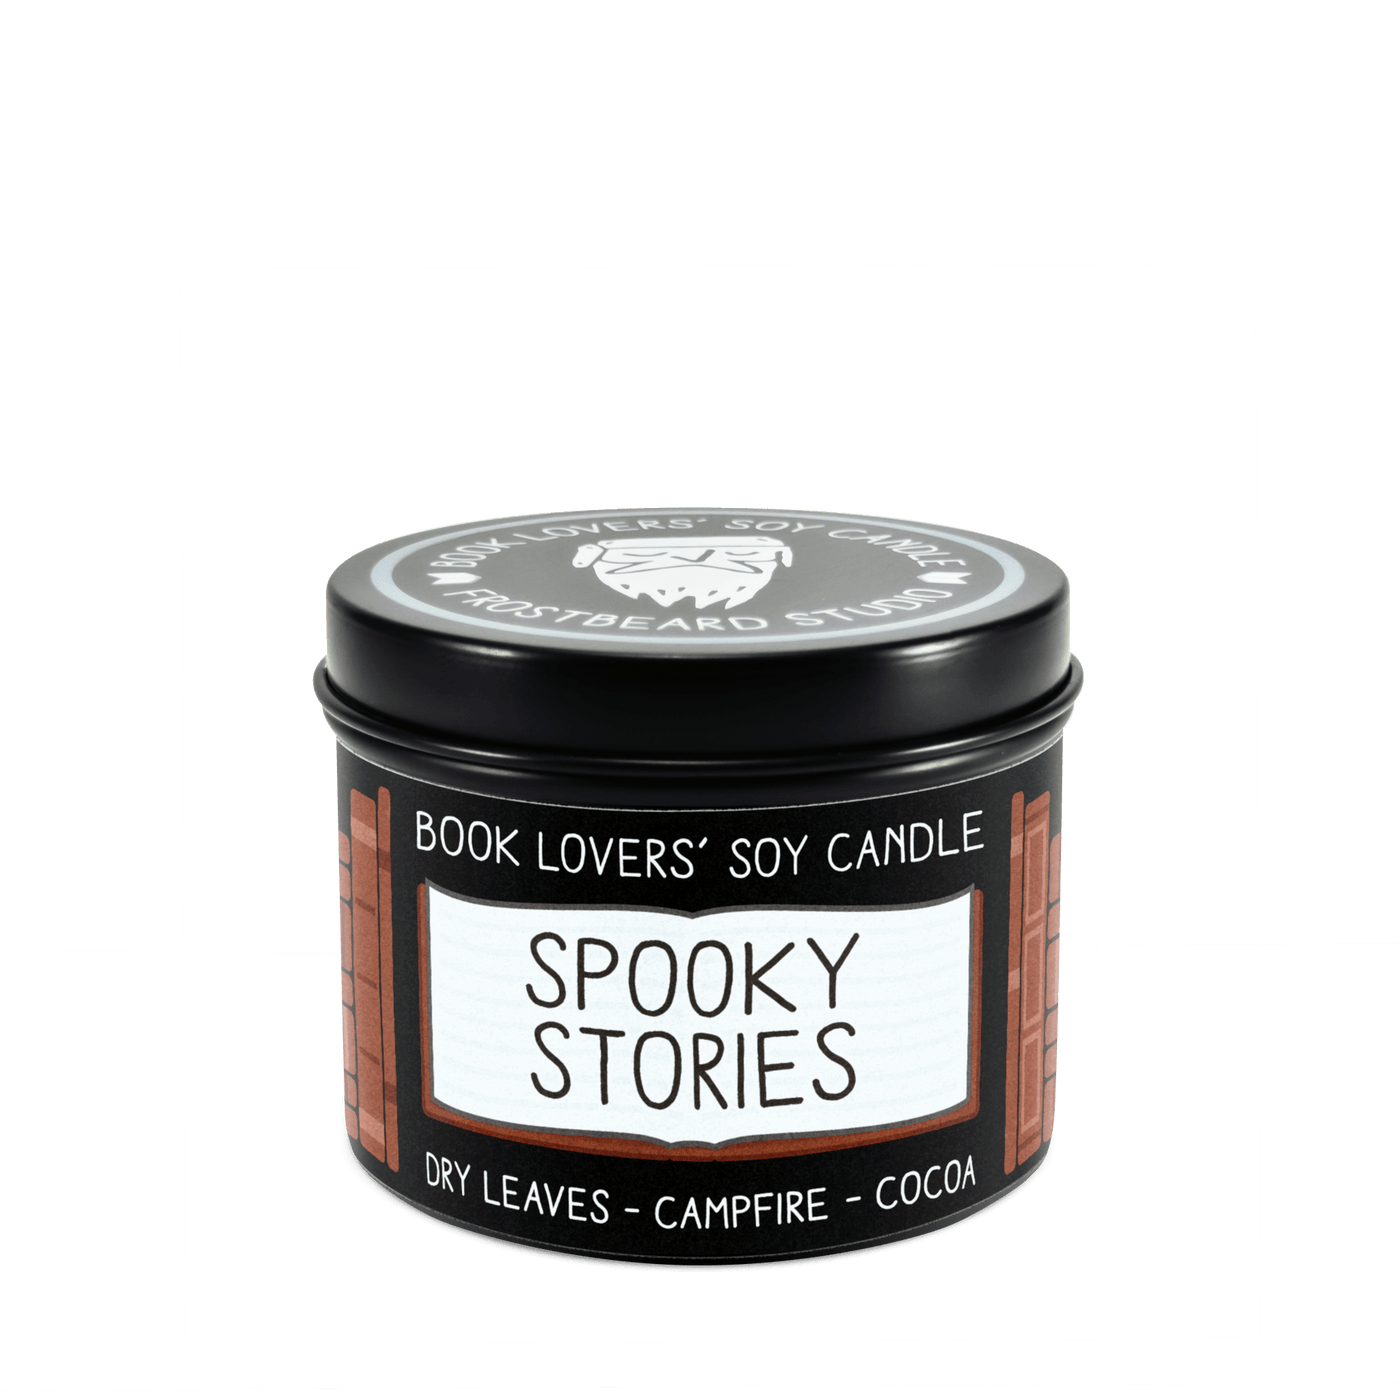 Spooky Stories - 4 oz Tin - Book Lovers' Soy Candle - Frostbeard Studio